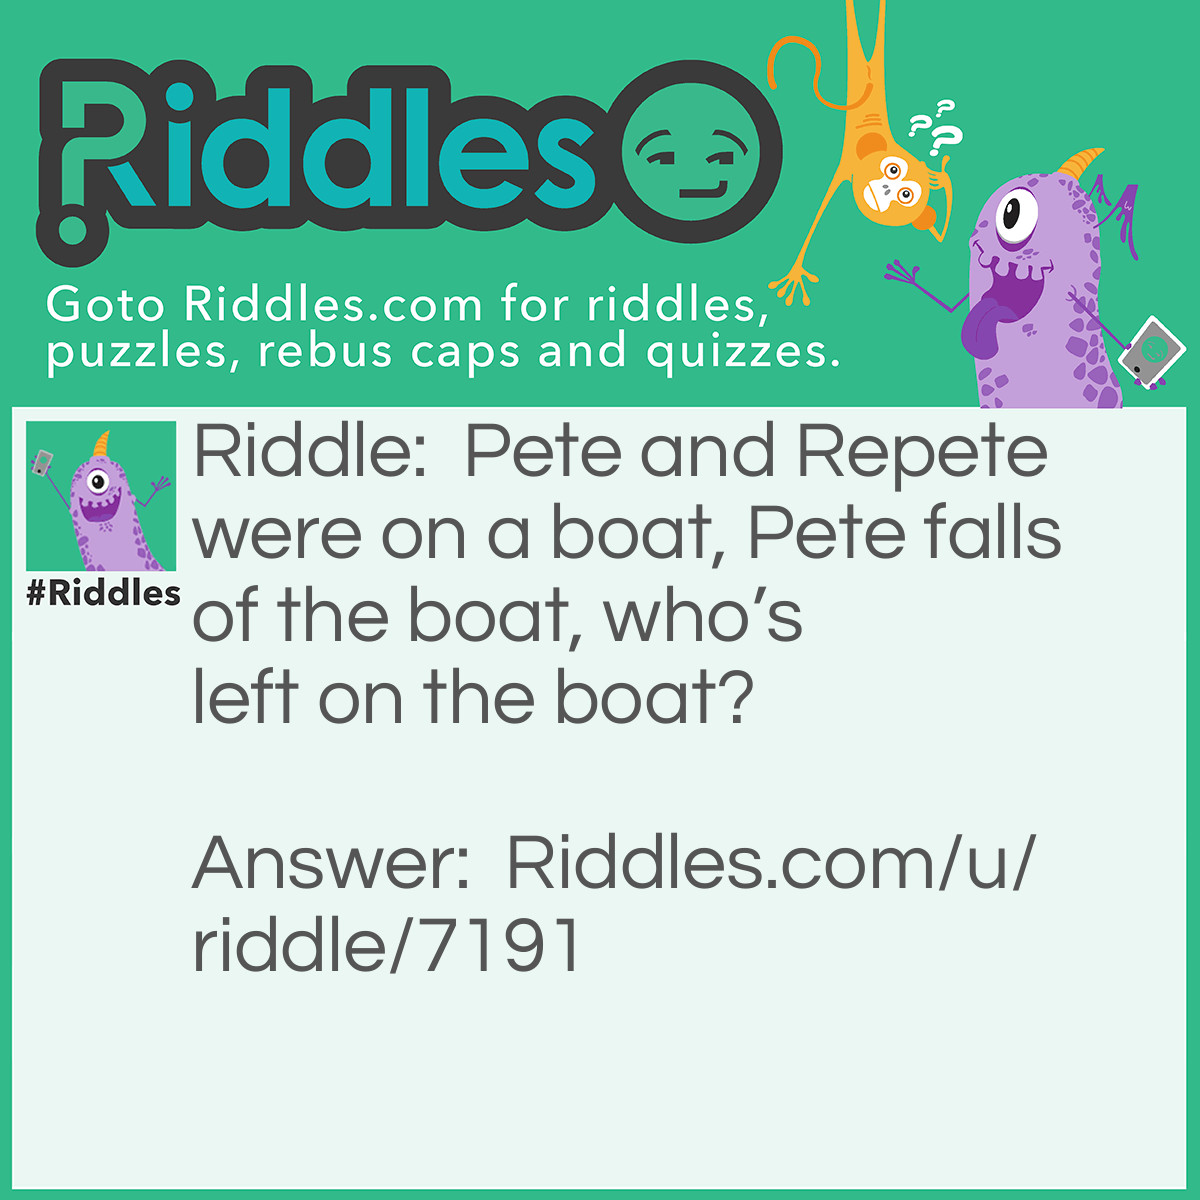 Riddle: Pete and Repete were on a boat, Pete falls of the boat, who's left on the boat? Answer: Repeat the question.